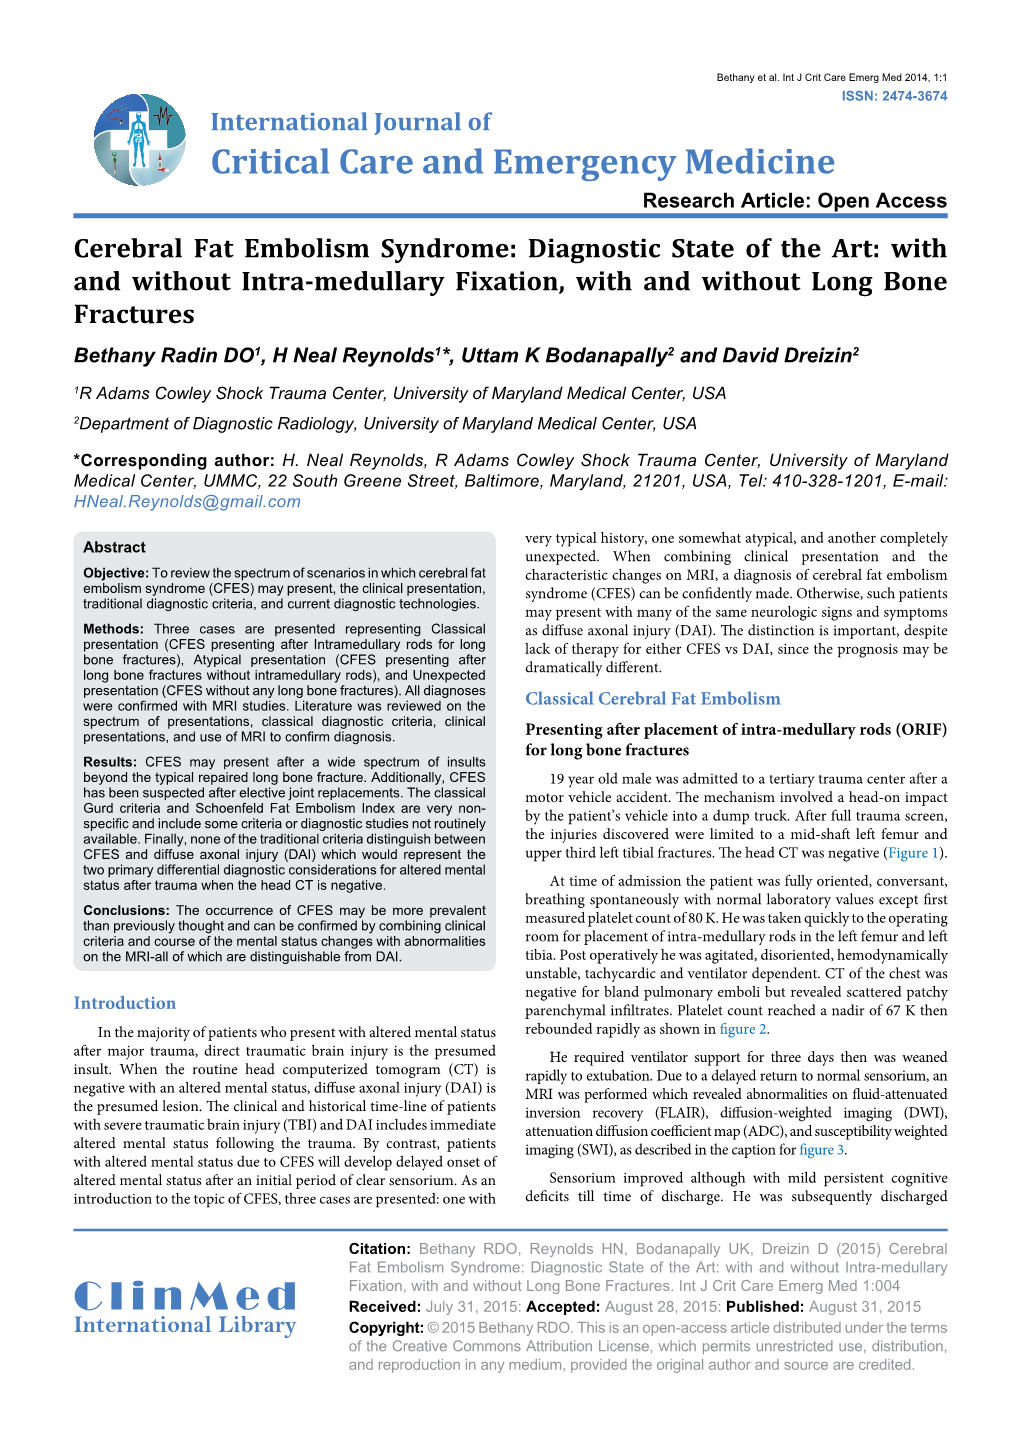 Cerebral Fat Embolism Syndrome: Diagnostic State of The